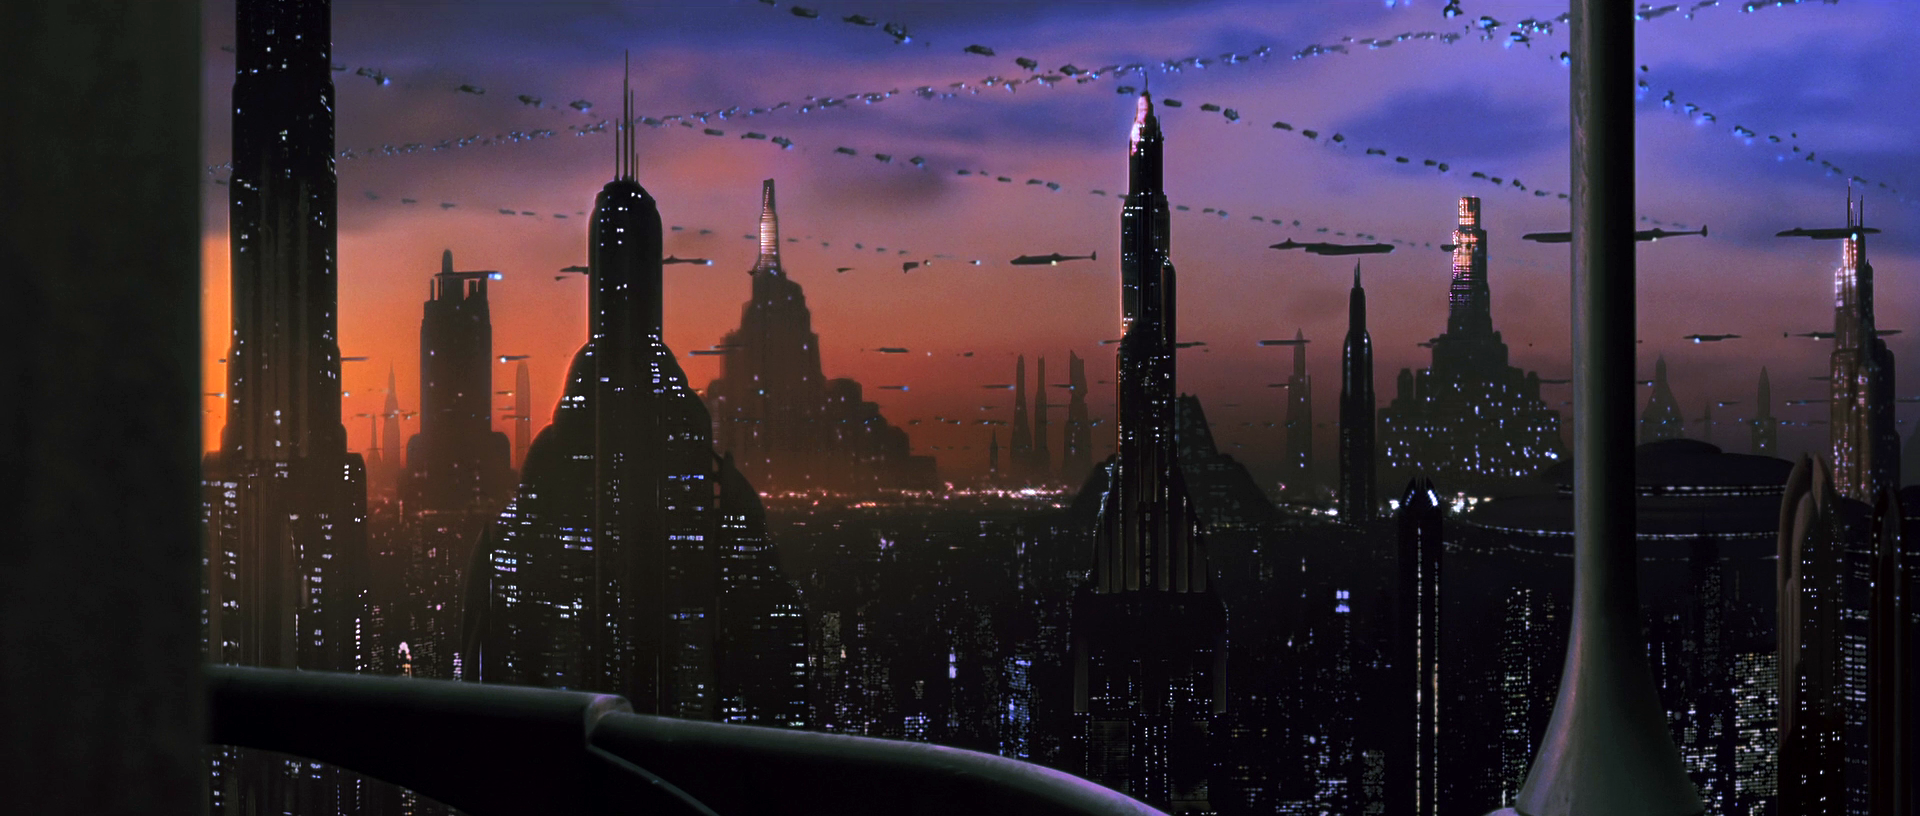 Coruscant From Star Wars - HD Wallpaper 